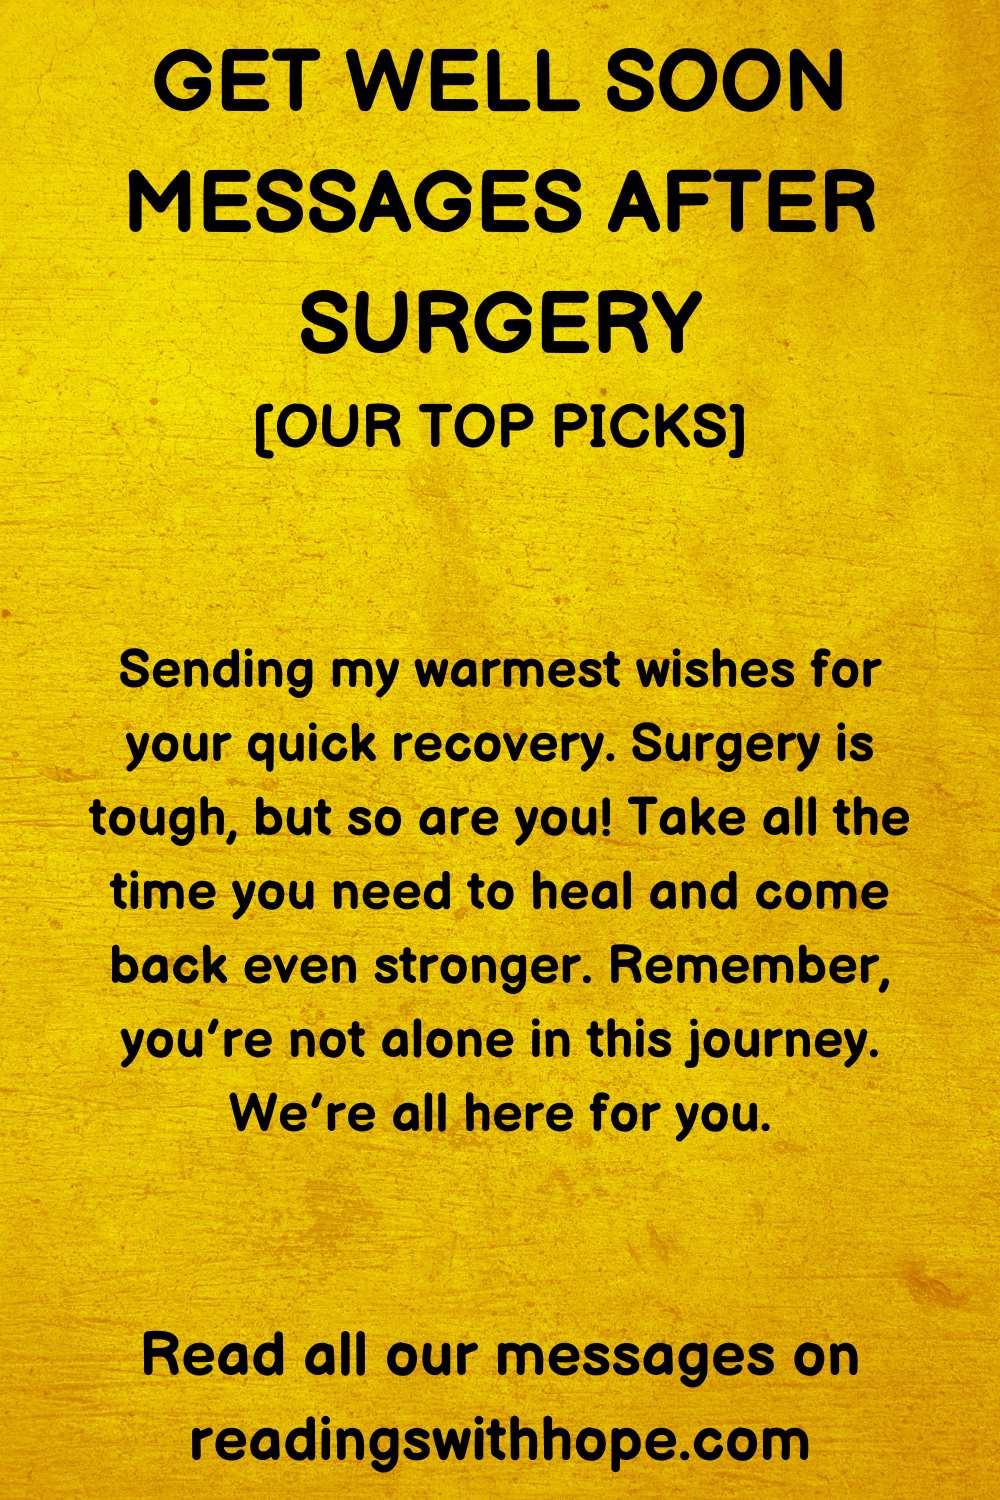 Get Well Soon Message after Surgery